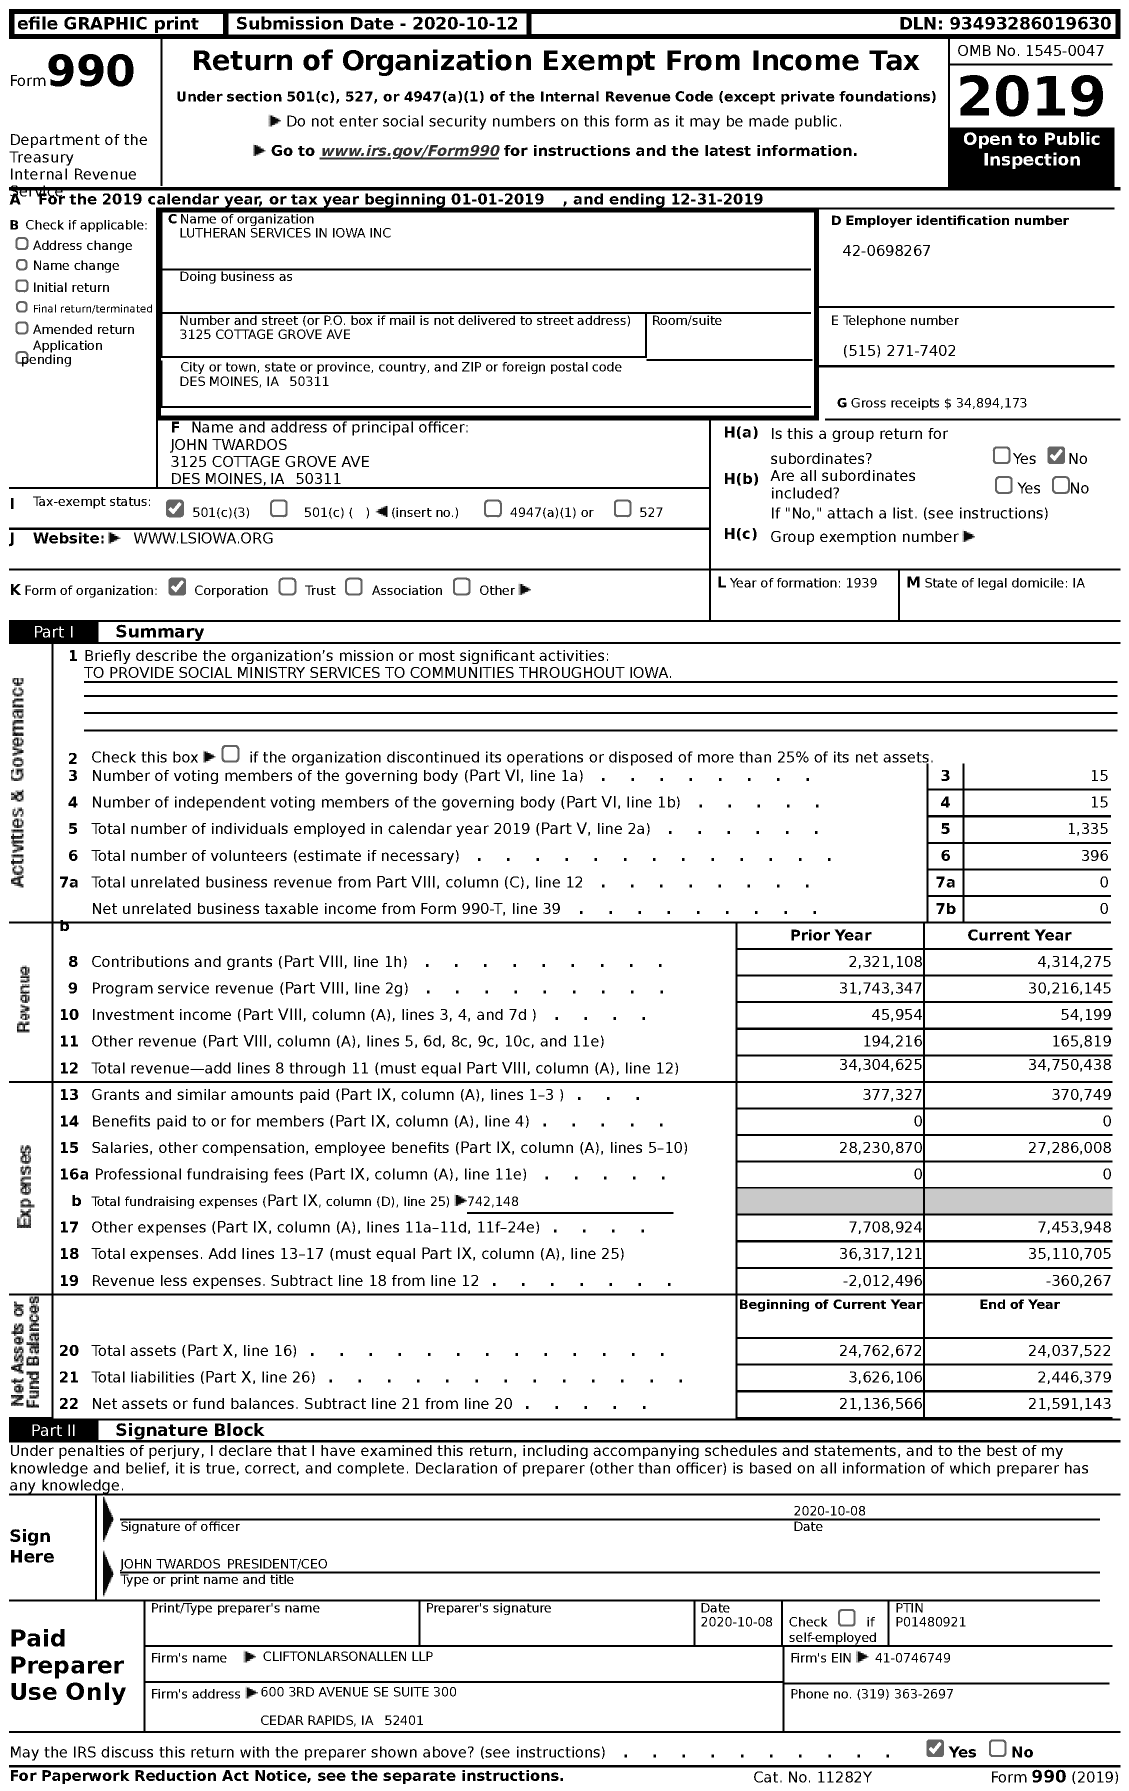 Image of first page of 2019 Form 990 for Lutheran Services in Iowa (LSI)